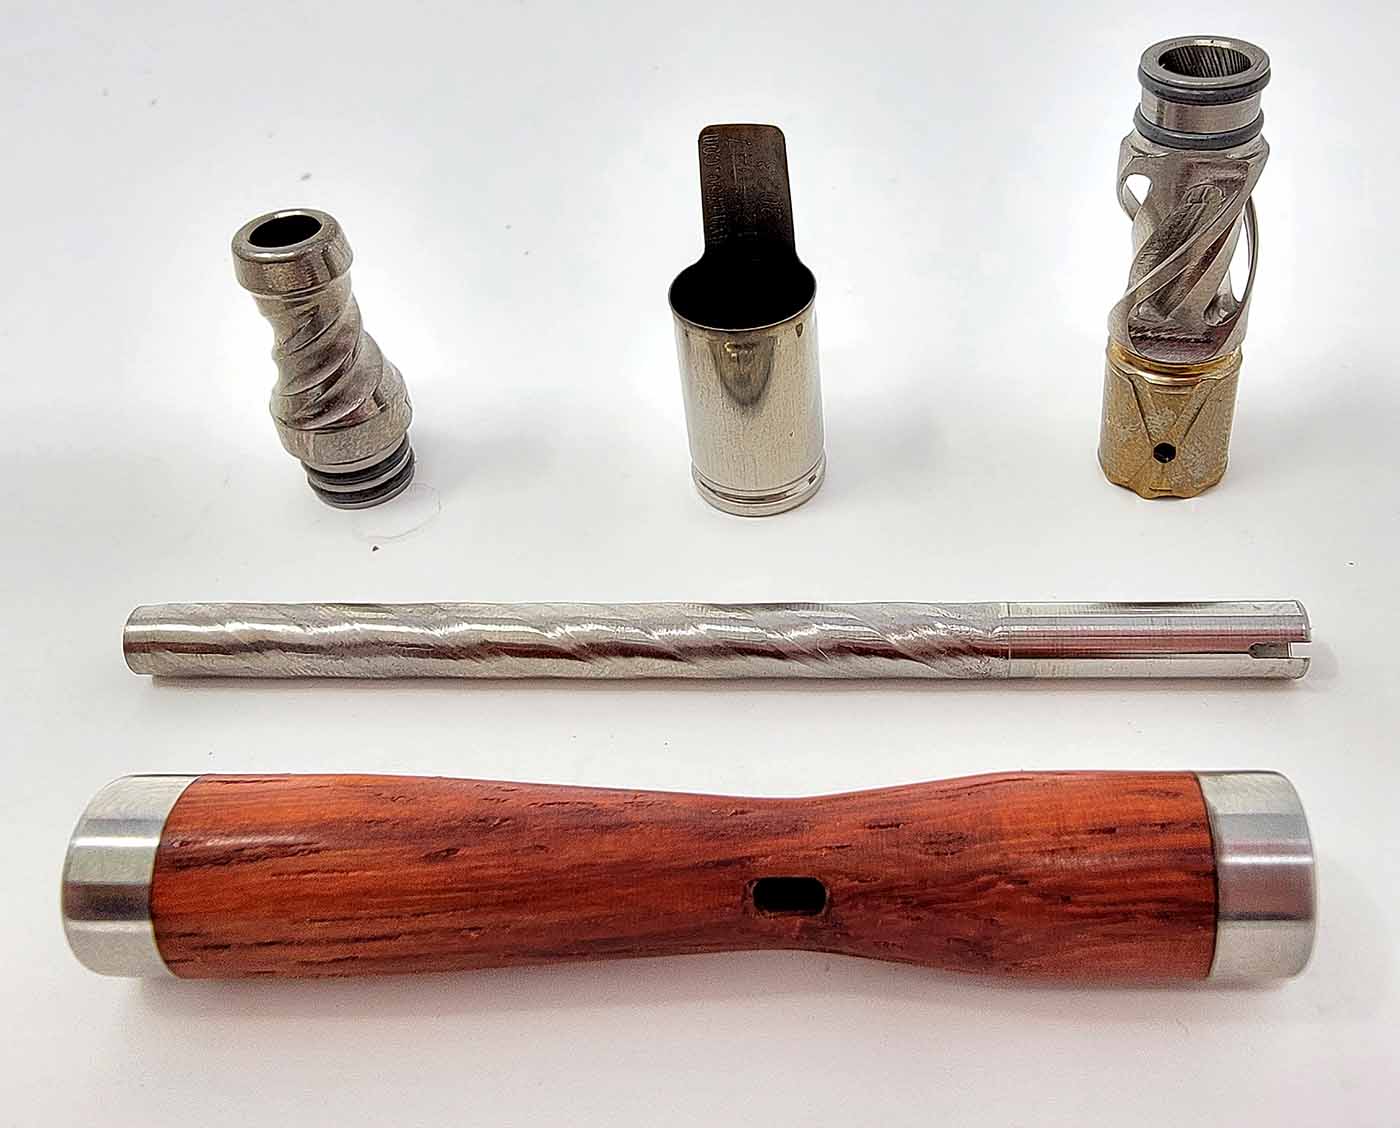 Dynavap Woodwynd is 5 pieces including the cap